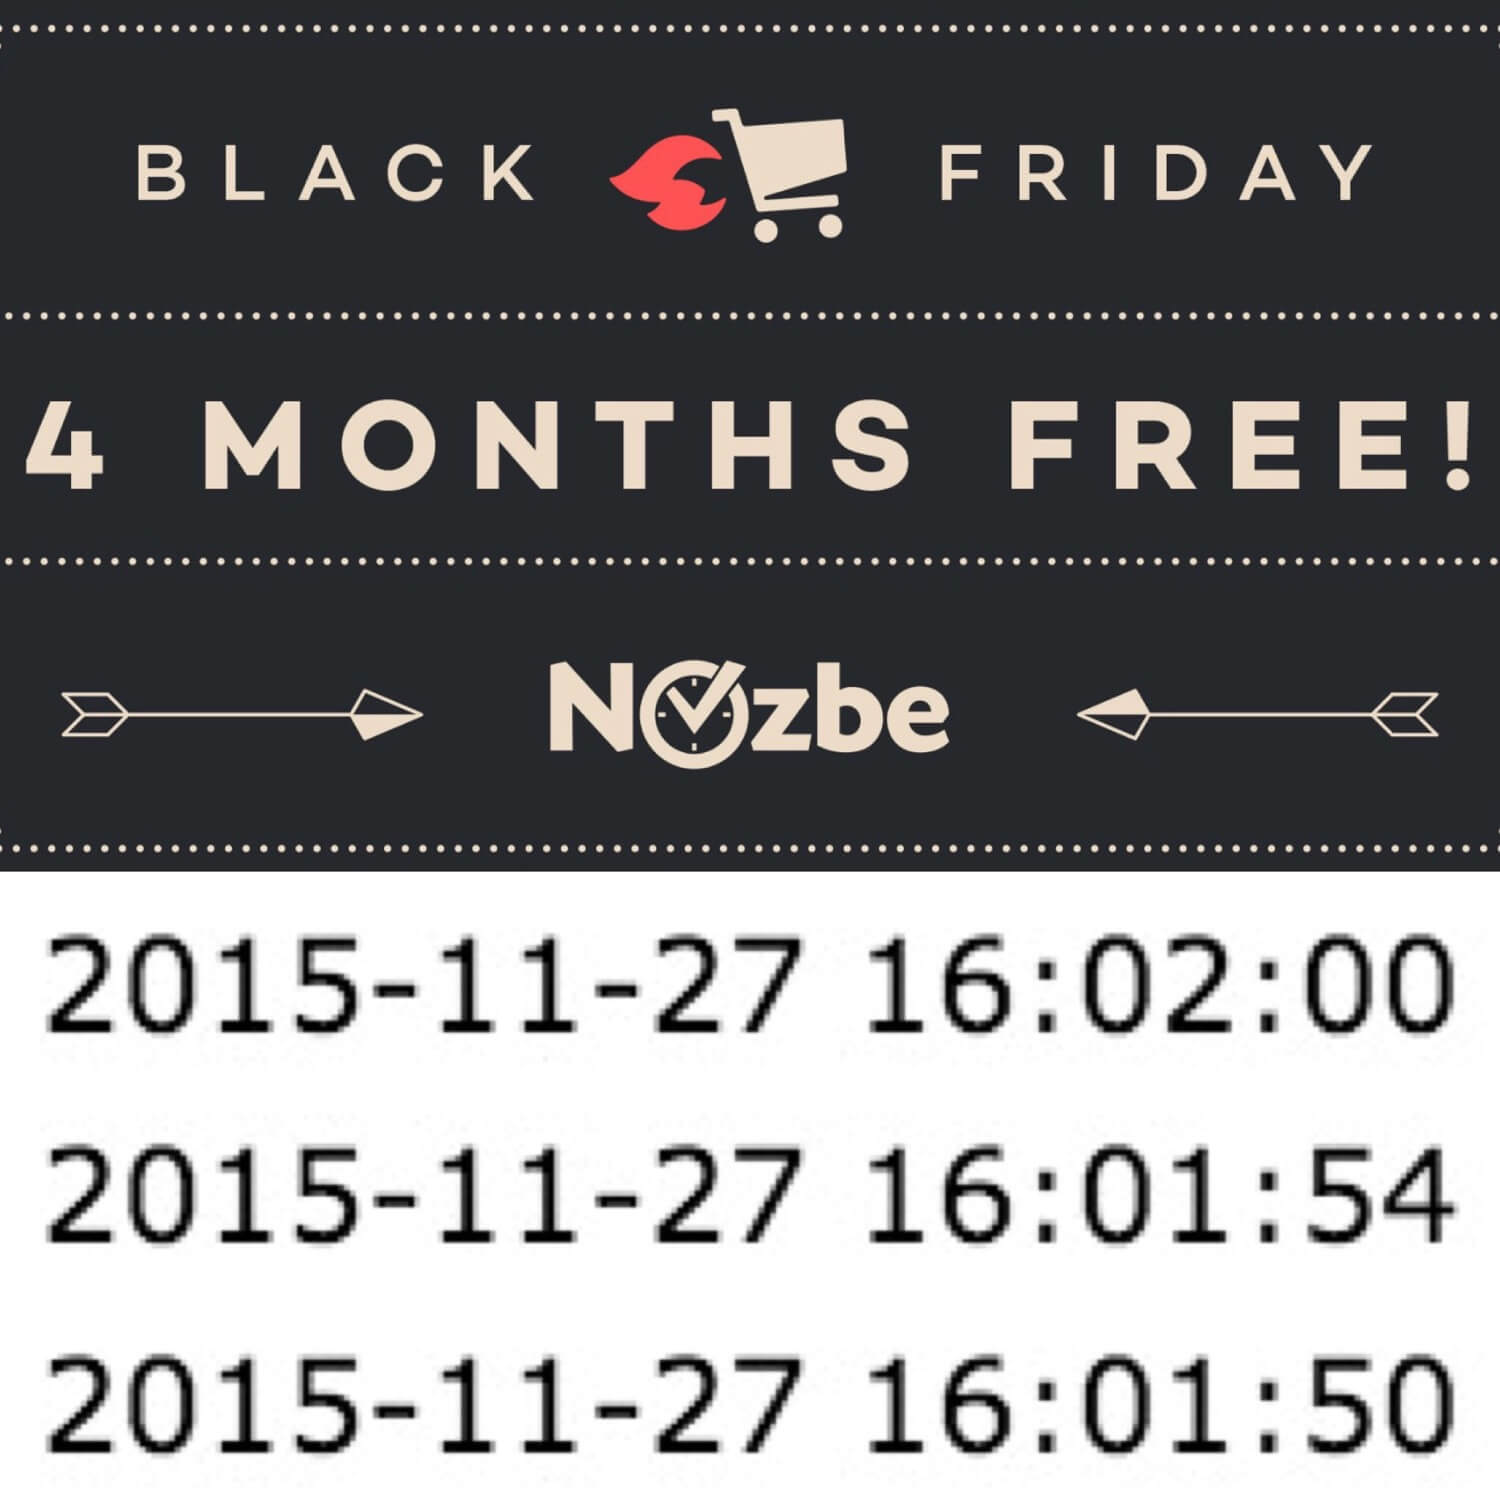 Why Black Friday sale is perfect timing for Nozbe users… [on: Nozbe blog]